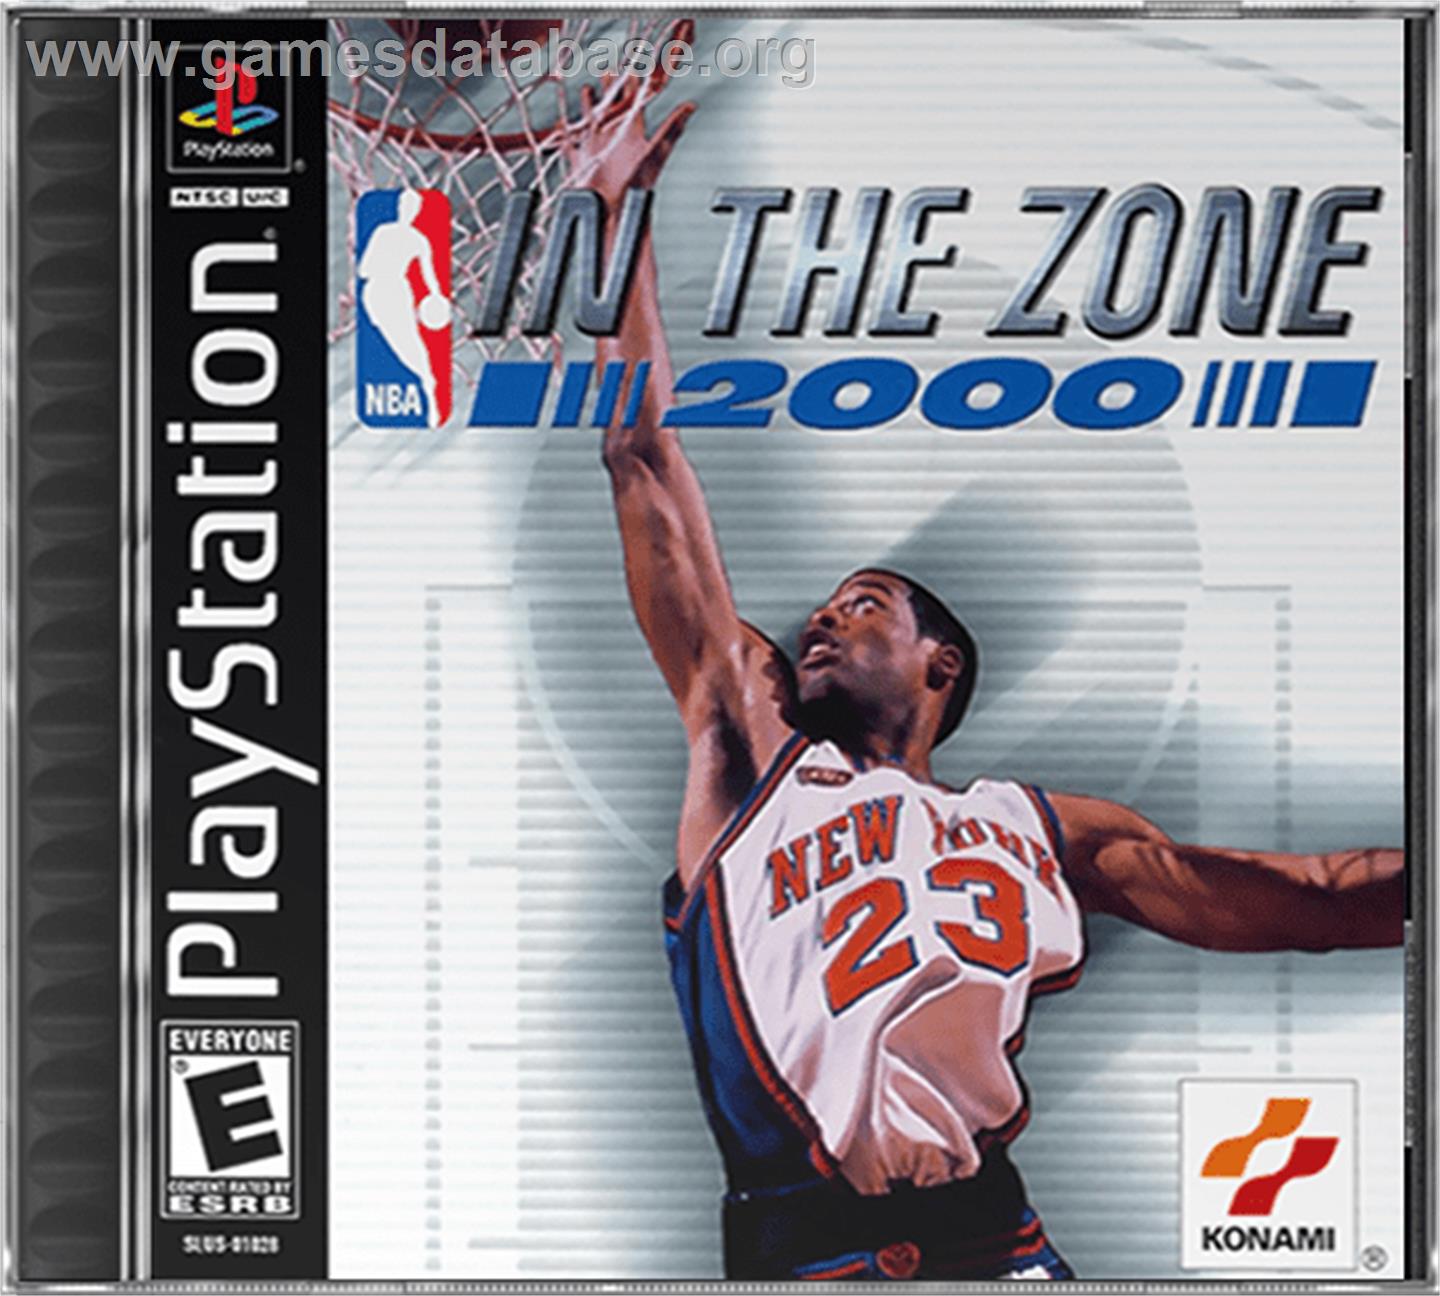 NBA in the Zone 2000 - Sony Playstation - Artwork - Box